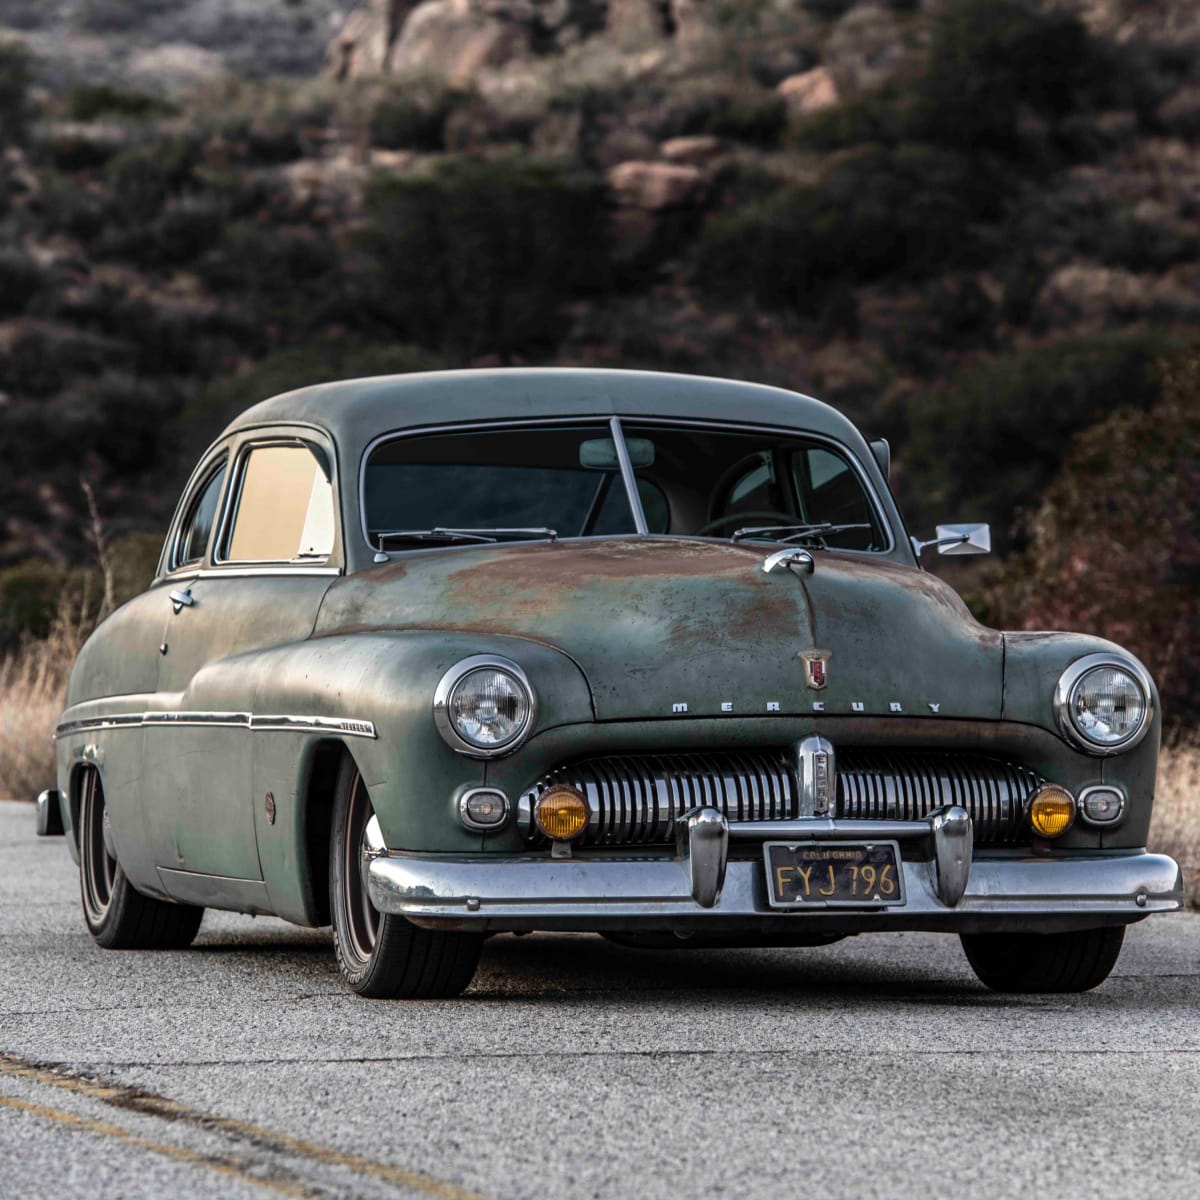 Icon's latest Derelict is an all-electric 1949 Mercury Coupe - Acquire